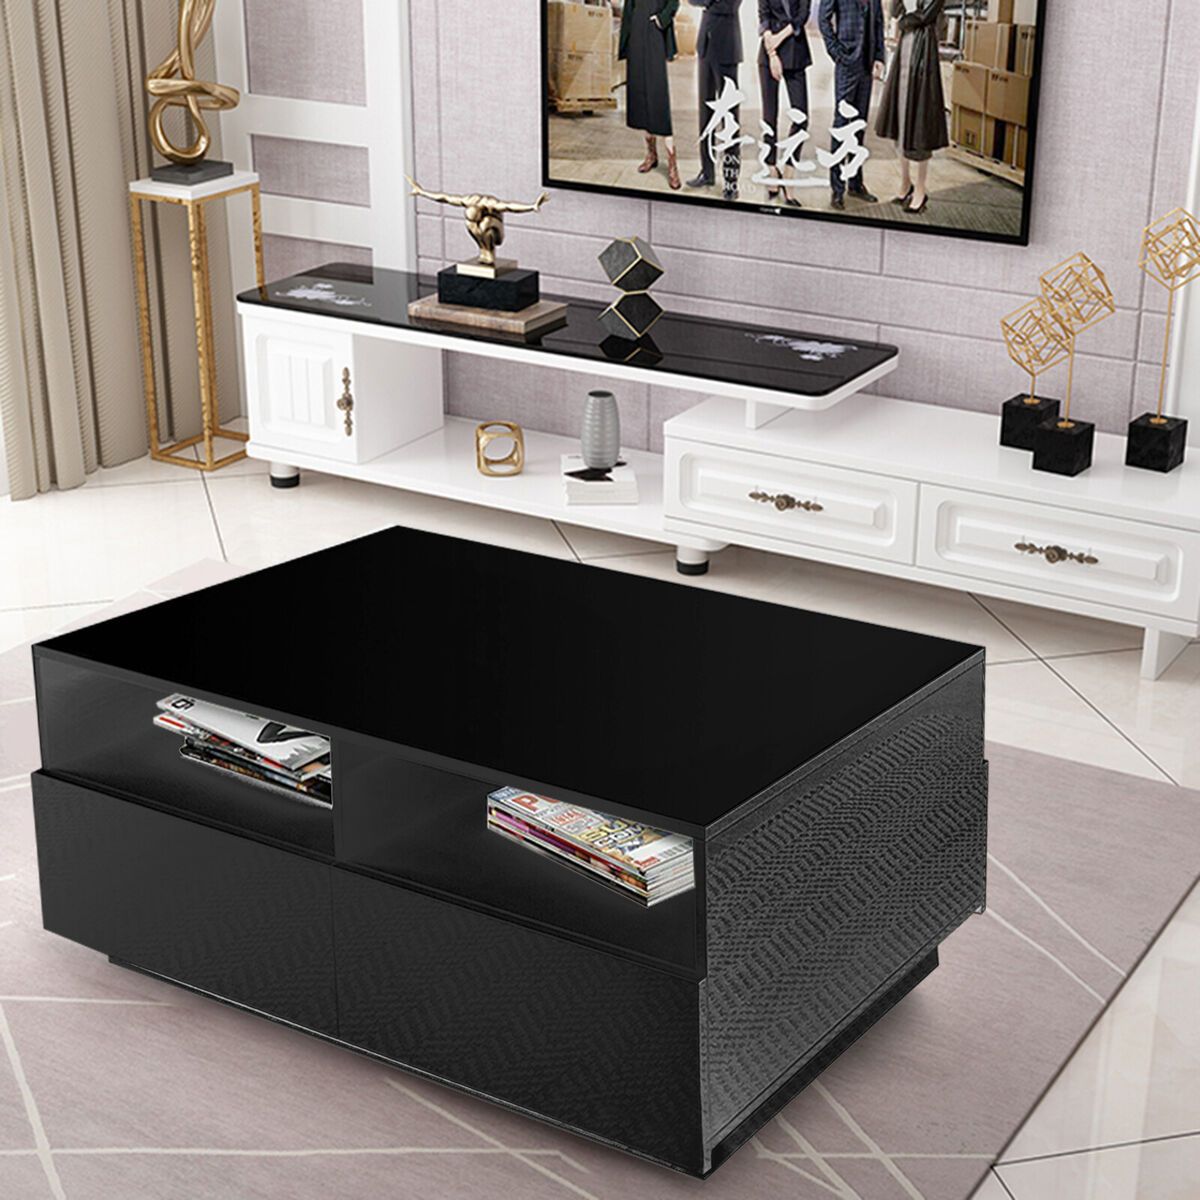 Modern Led Coffee Table High Gloss End Table 4 Drawers Living Room Furniture  | Ebay Pertaining To Led Coffee Tables With 4 Drawers (View 12 of 15)